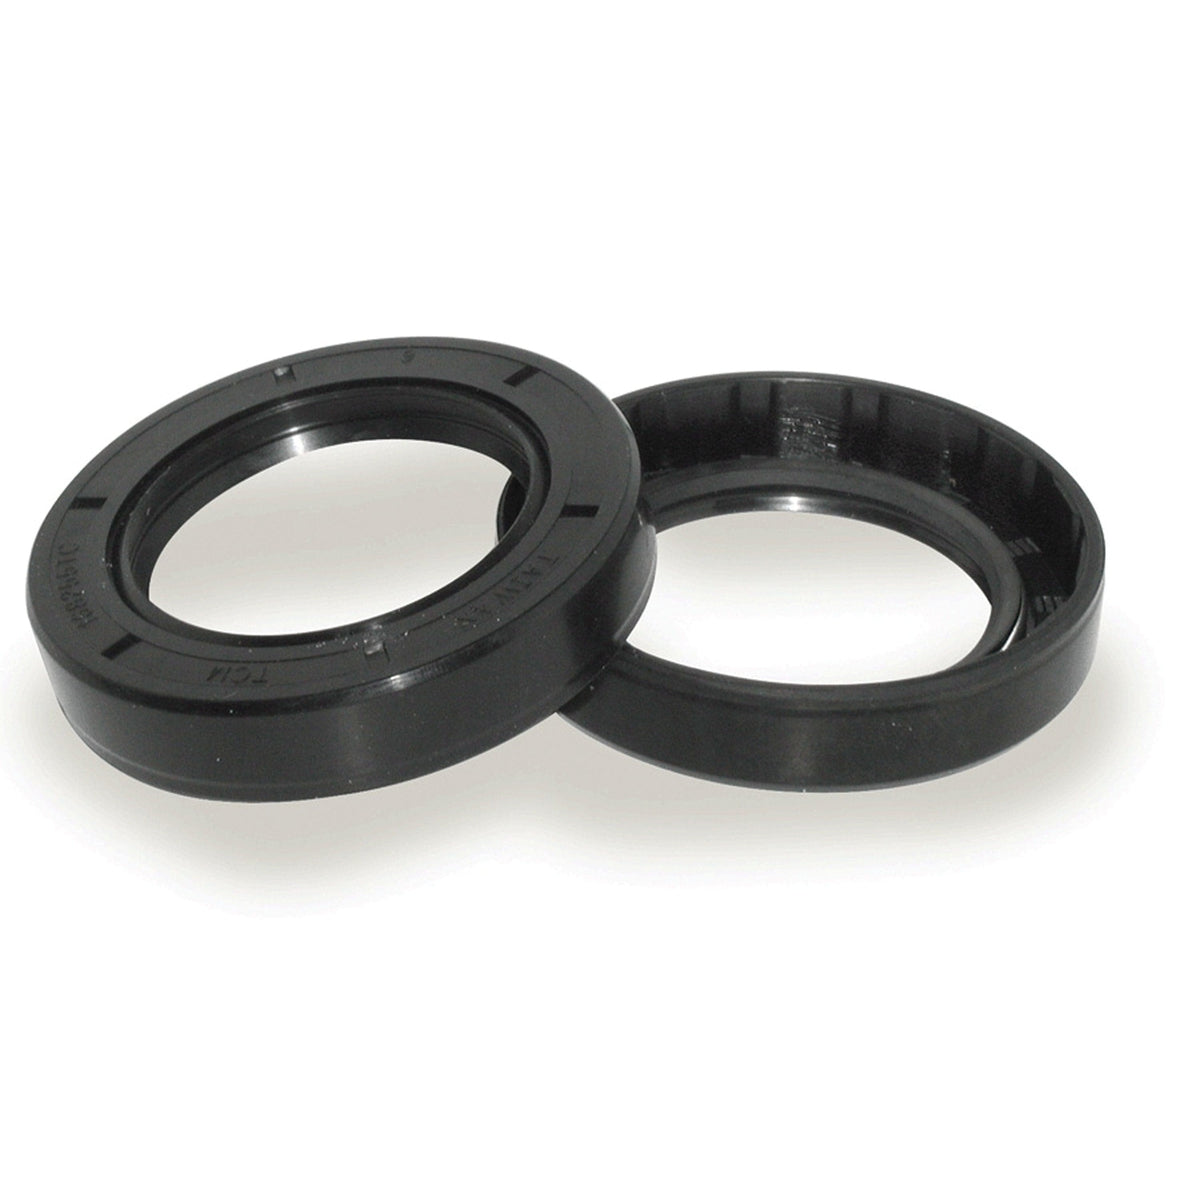 Tie Down Engineering Qualifies for Free Shipping Tie Down 2.25" Replacement Seals 2-pk #81316